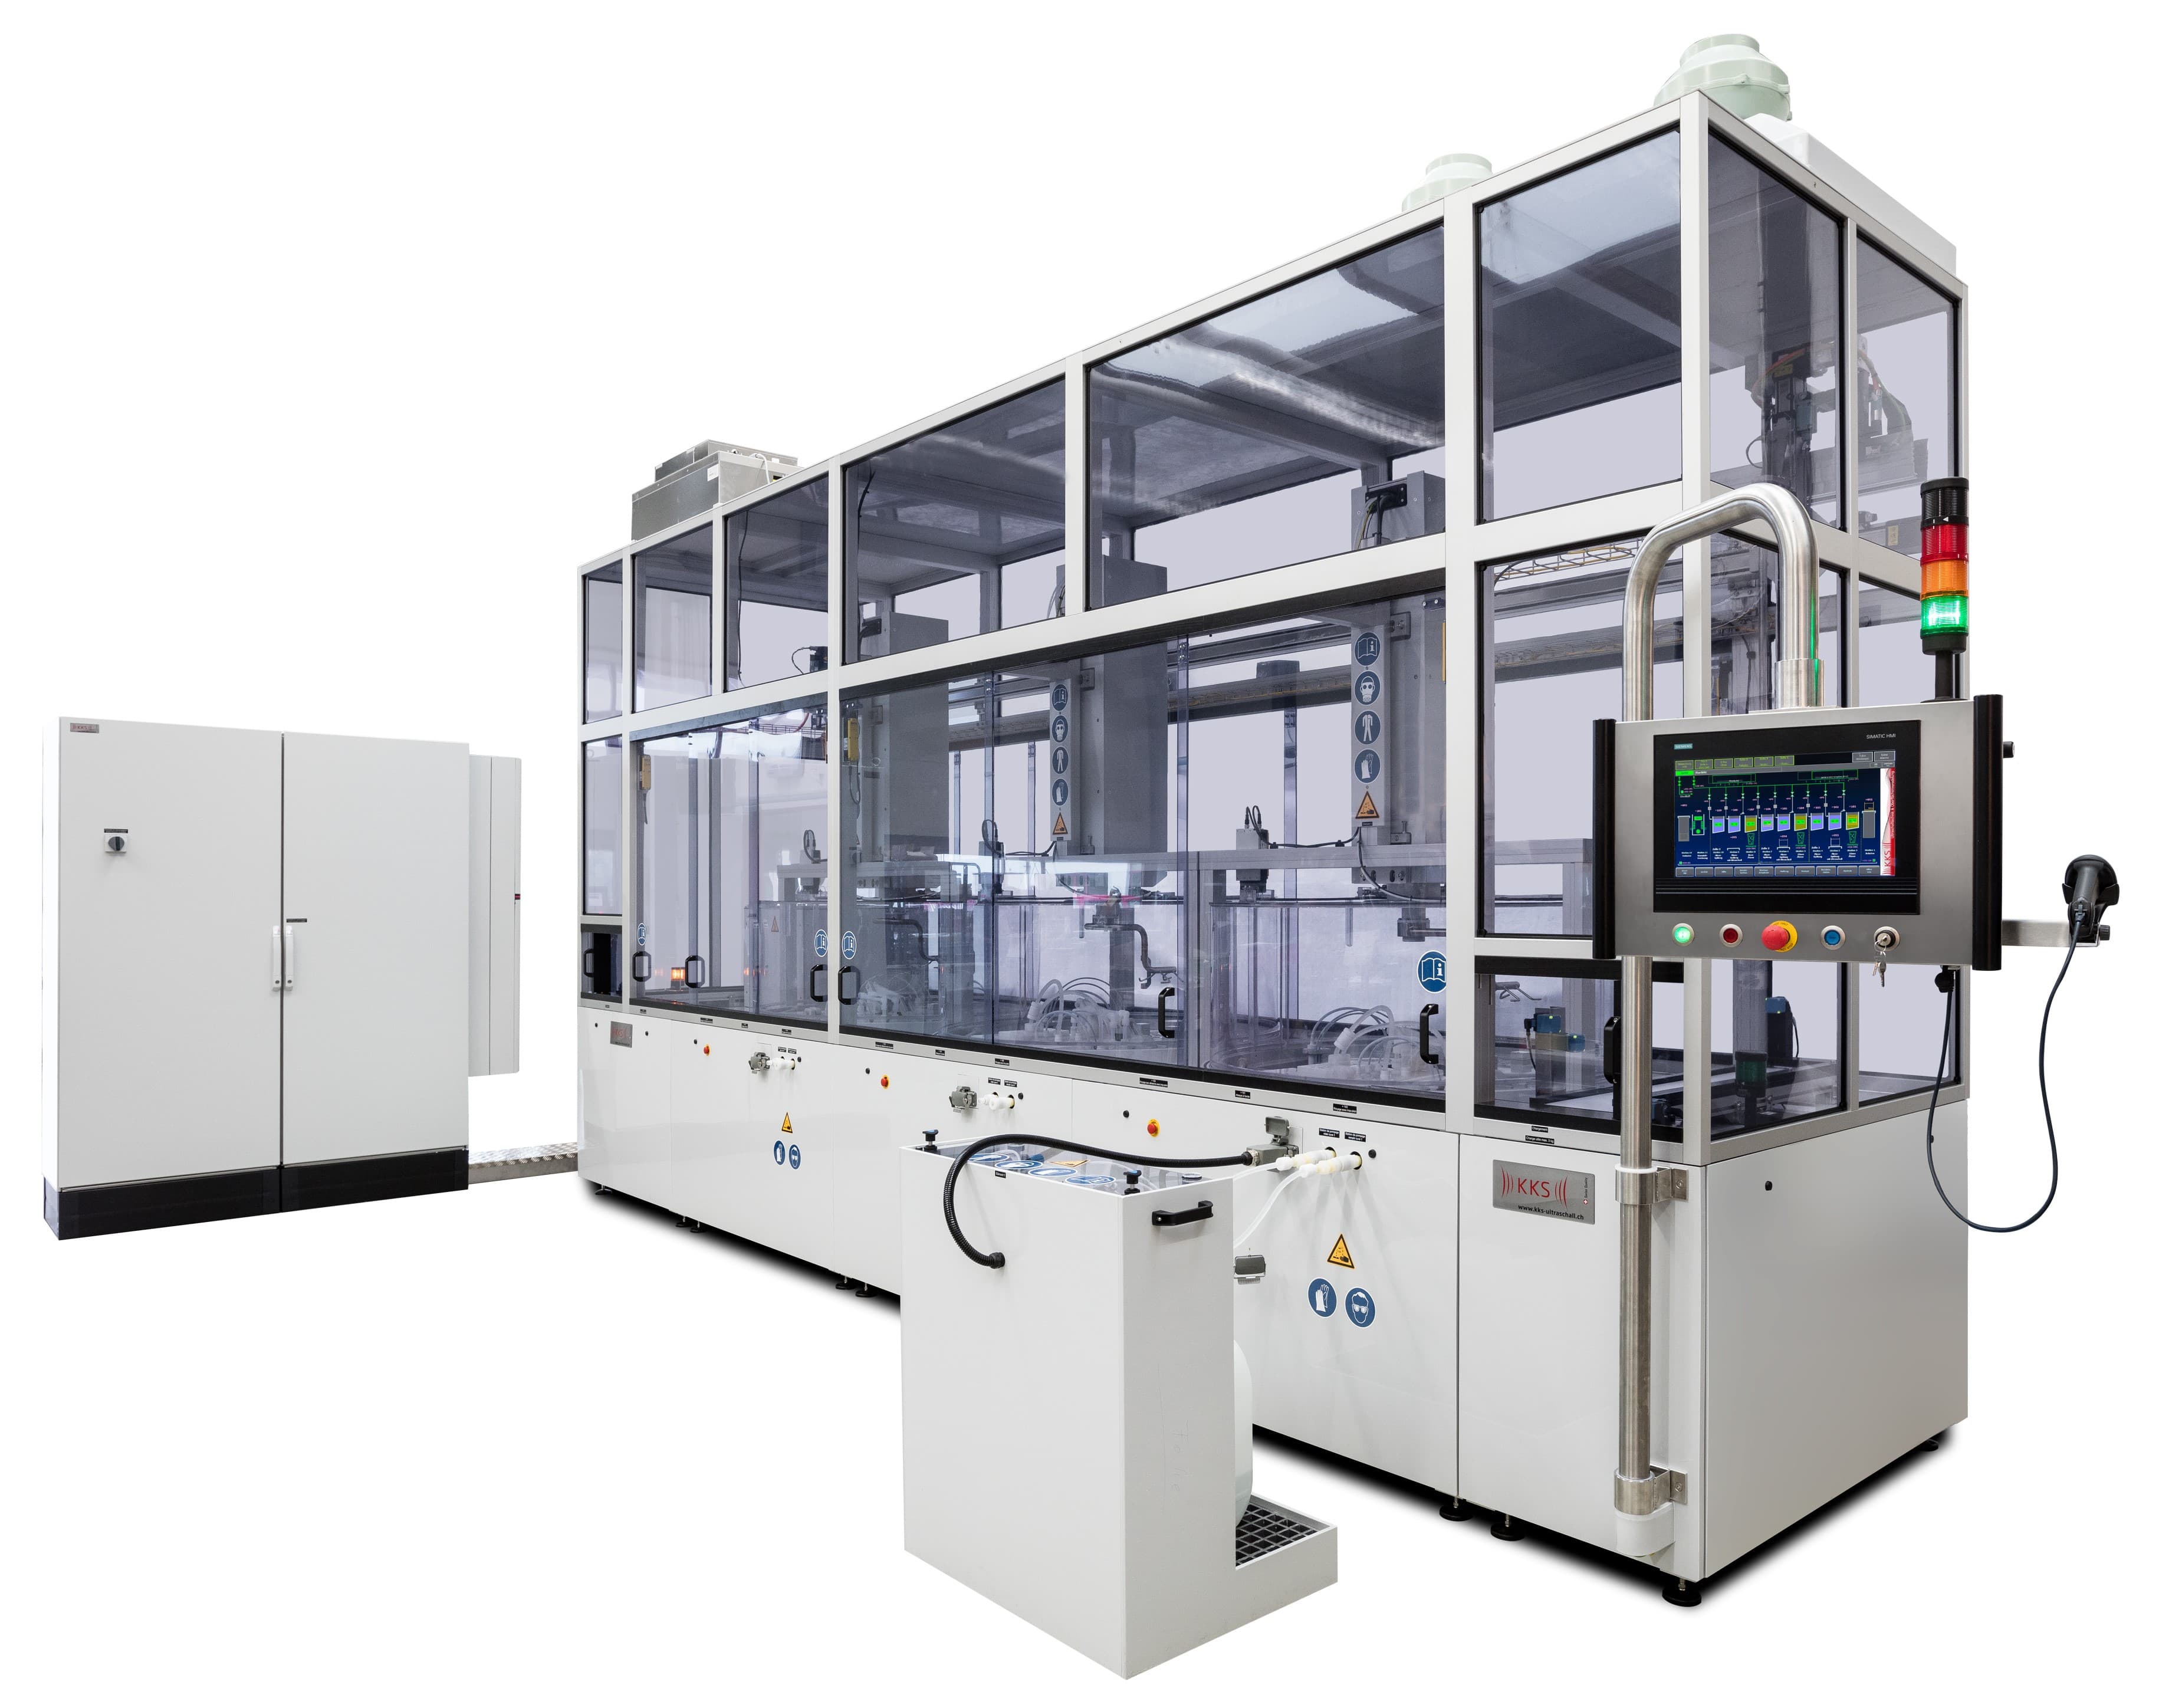 Automatic etching system with 3 etching modules for highest productivity